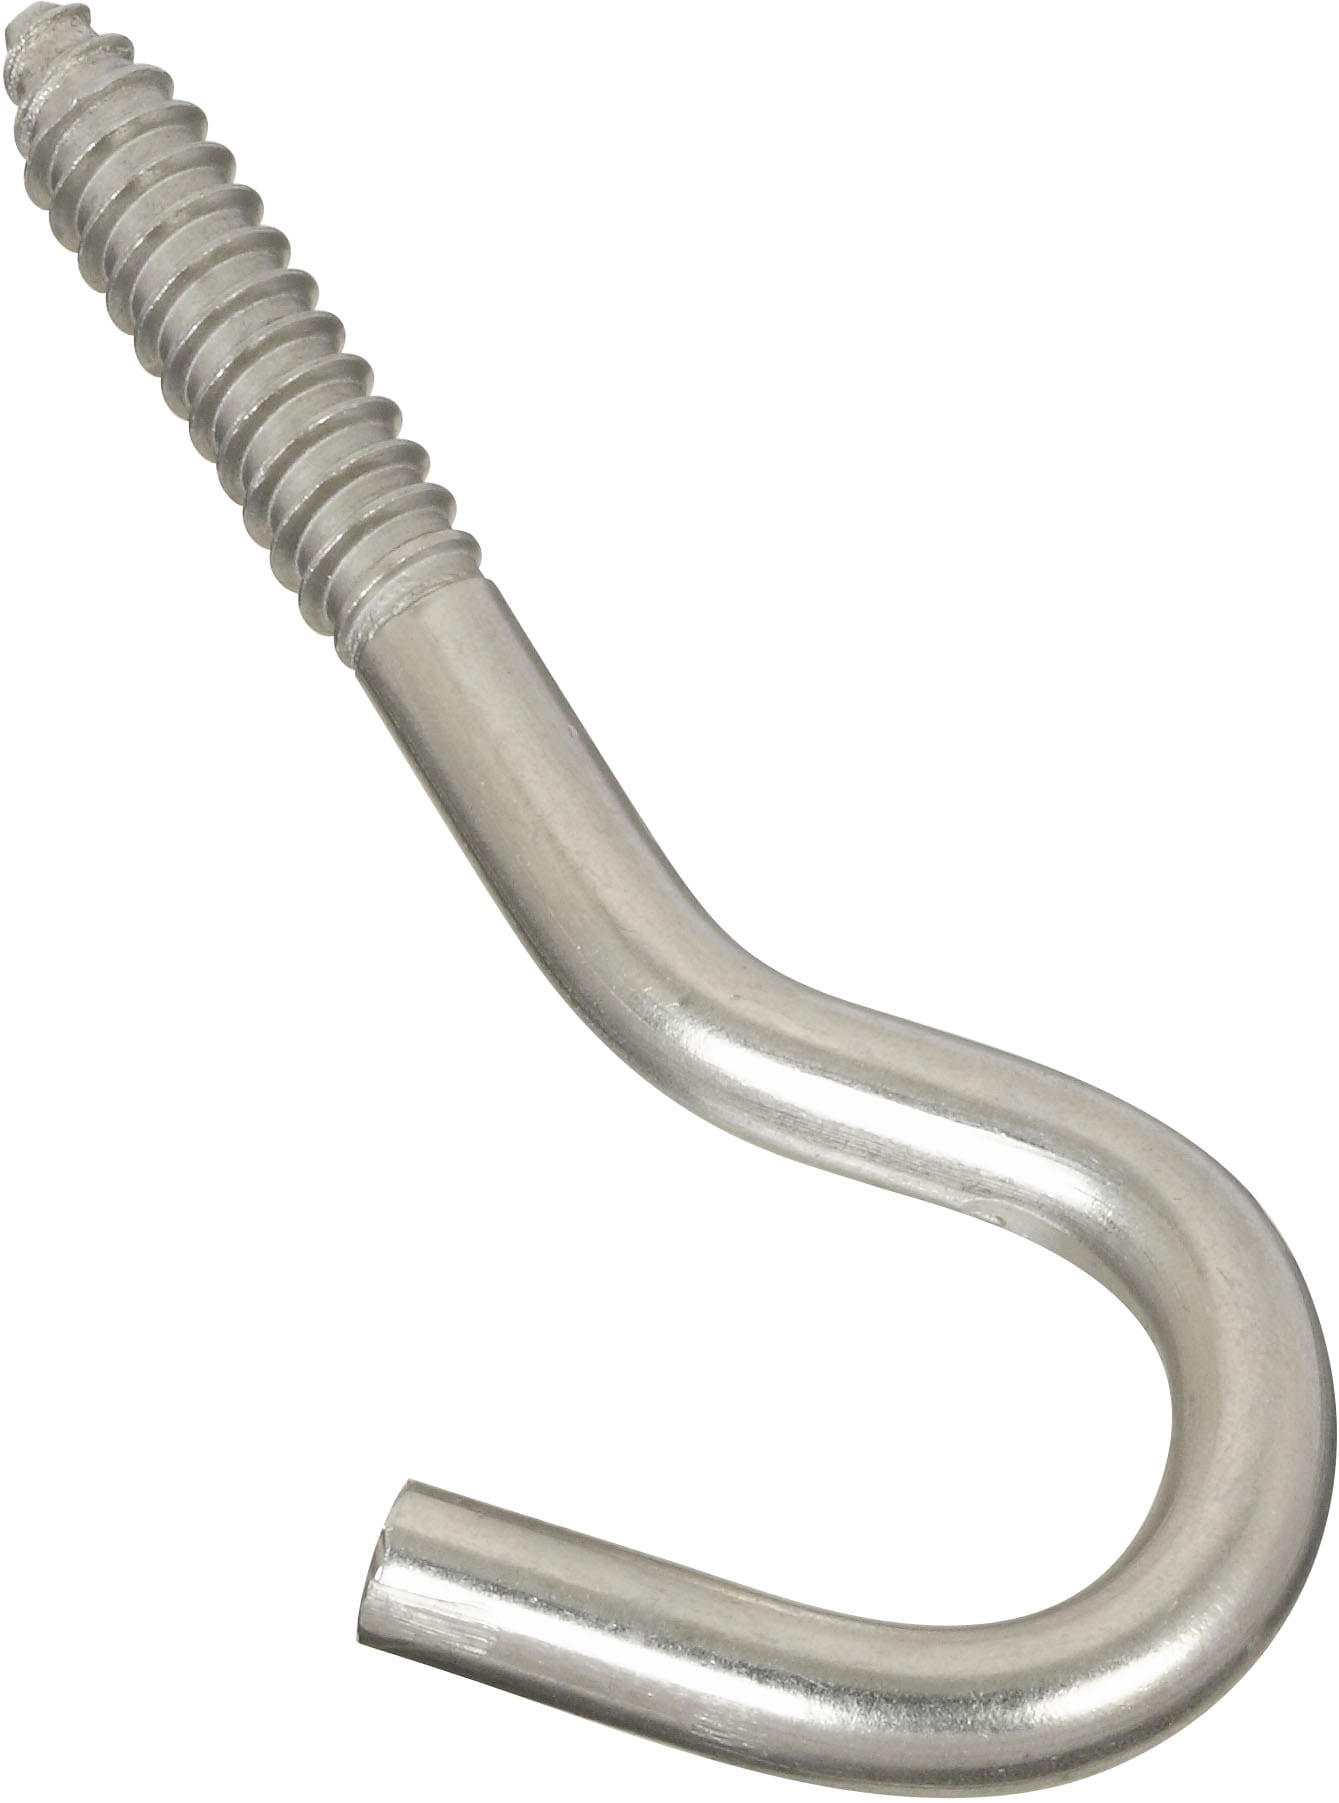 Pig tail curl hook stainless steel with wood screw lag thread